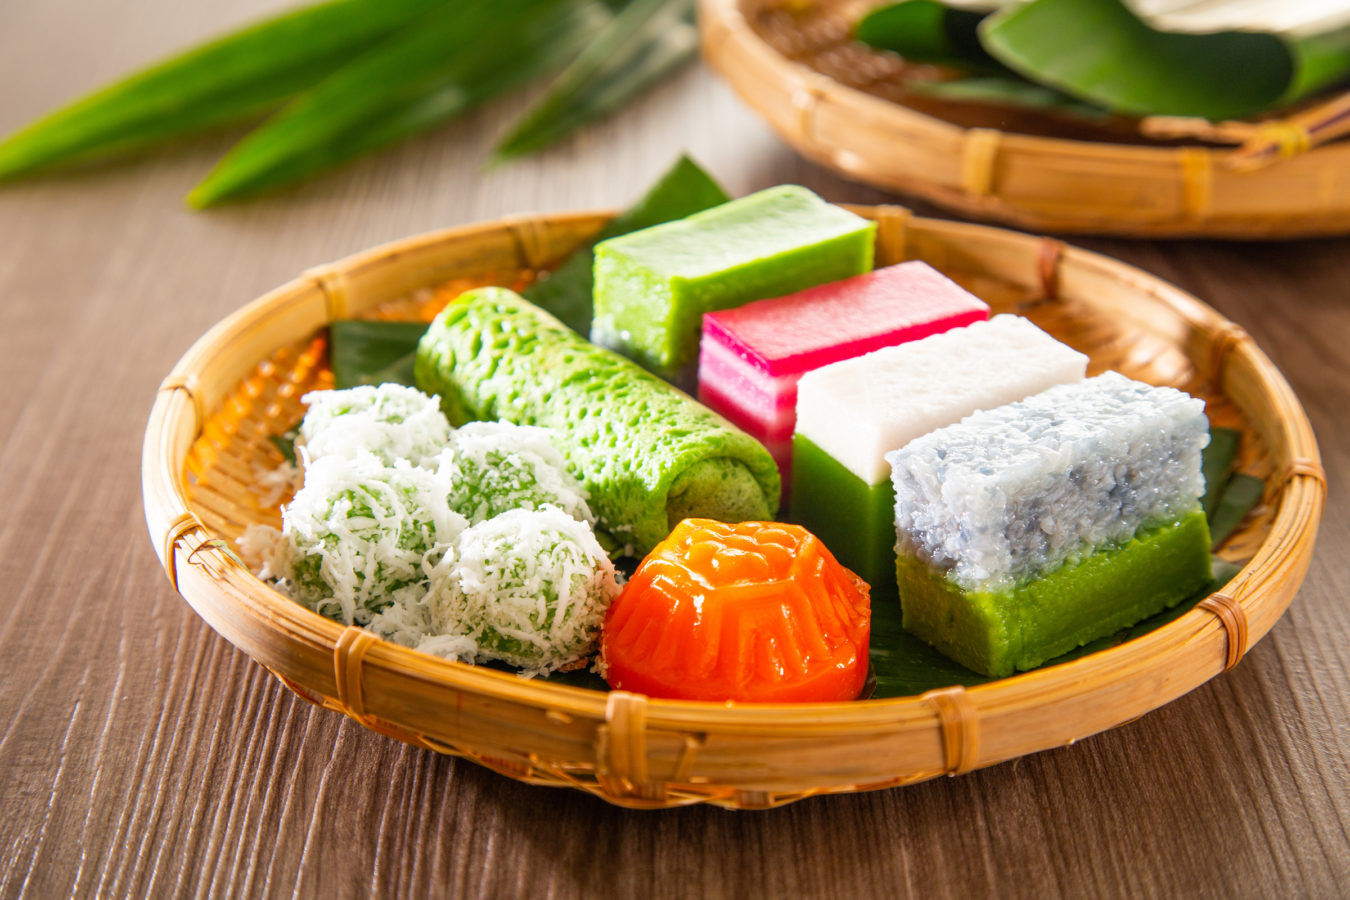 9 places to get the best traditional kueh in Singapore